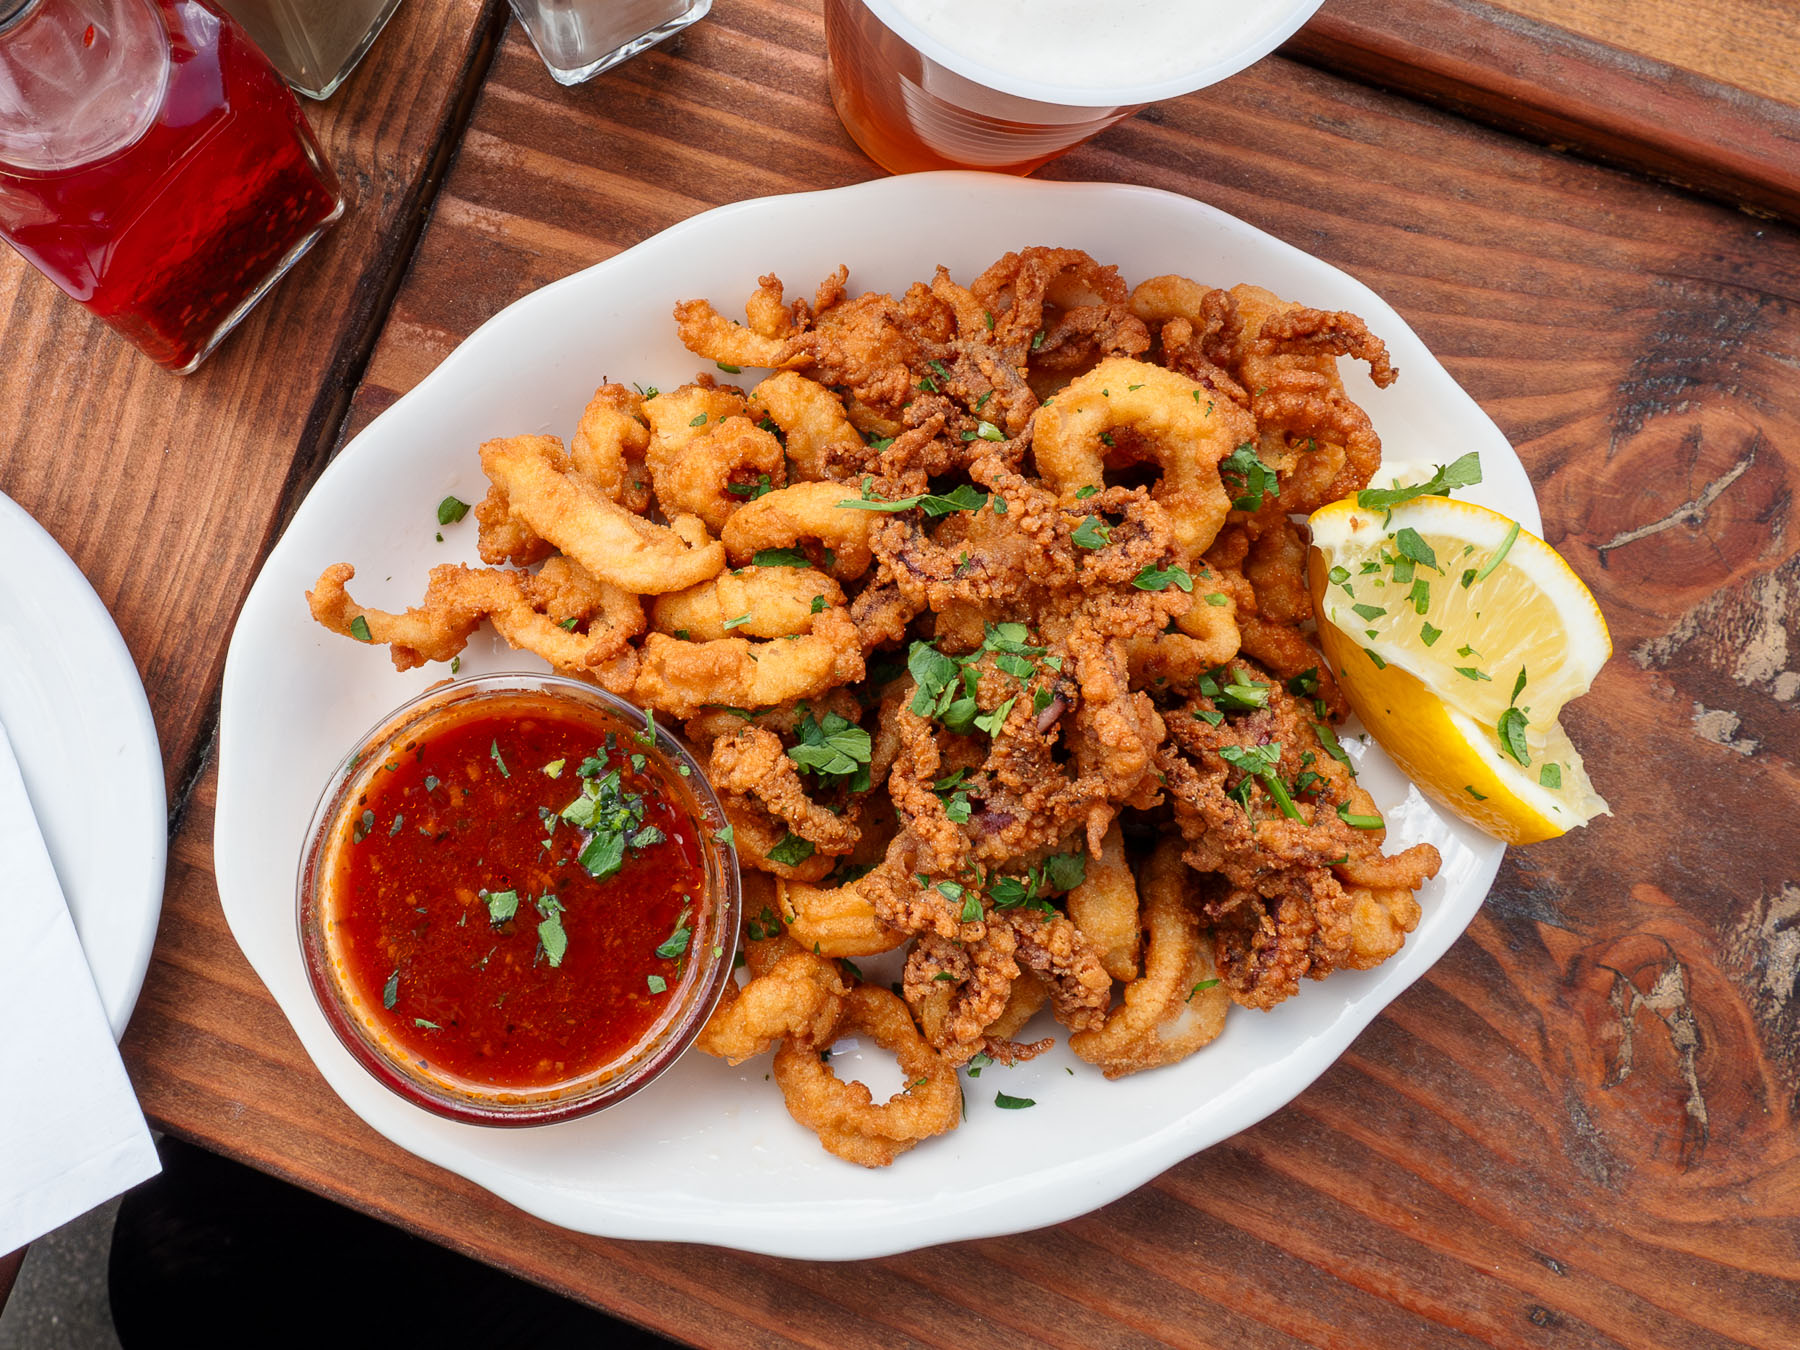 Fried Calamari On a Plate With Seafood Tomato Red Sauce Parsley and Lemon from The Daily Catch North End